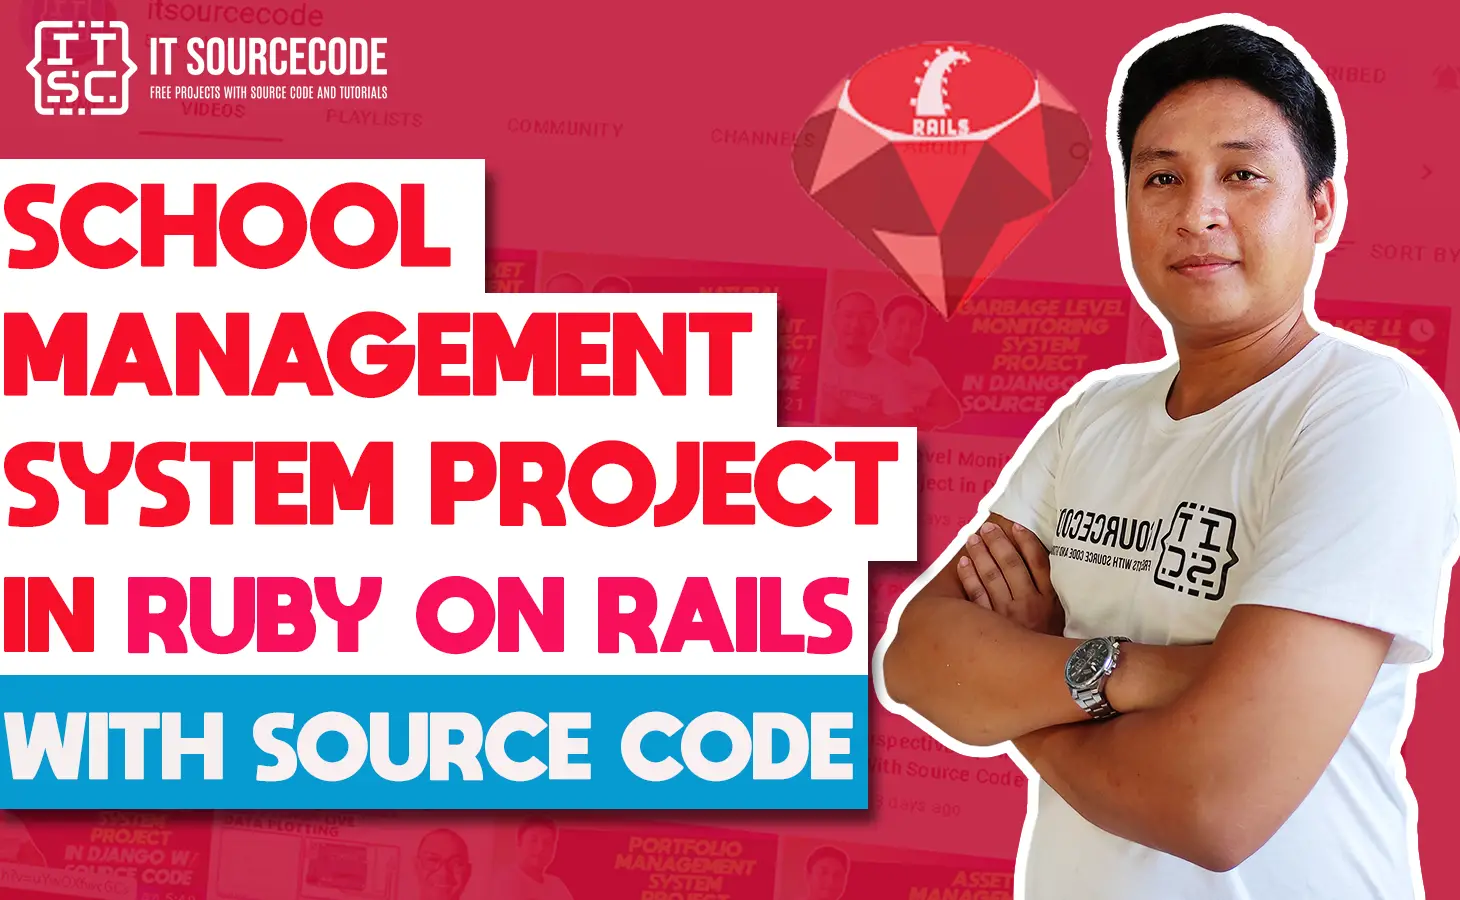 School Management System Project in Ruby on Rails with Source Code